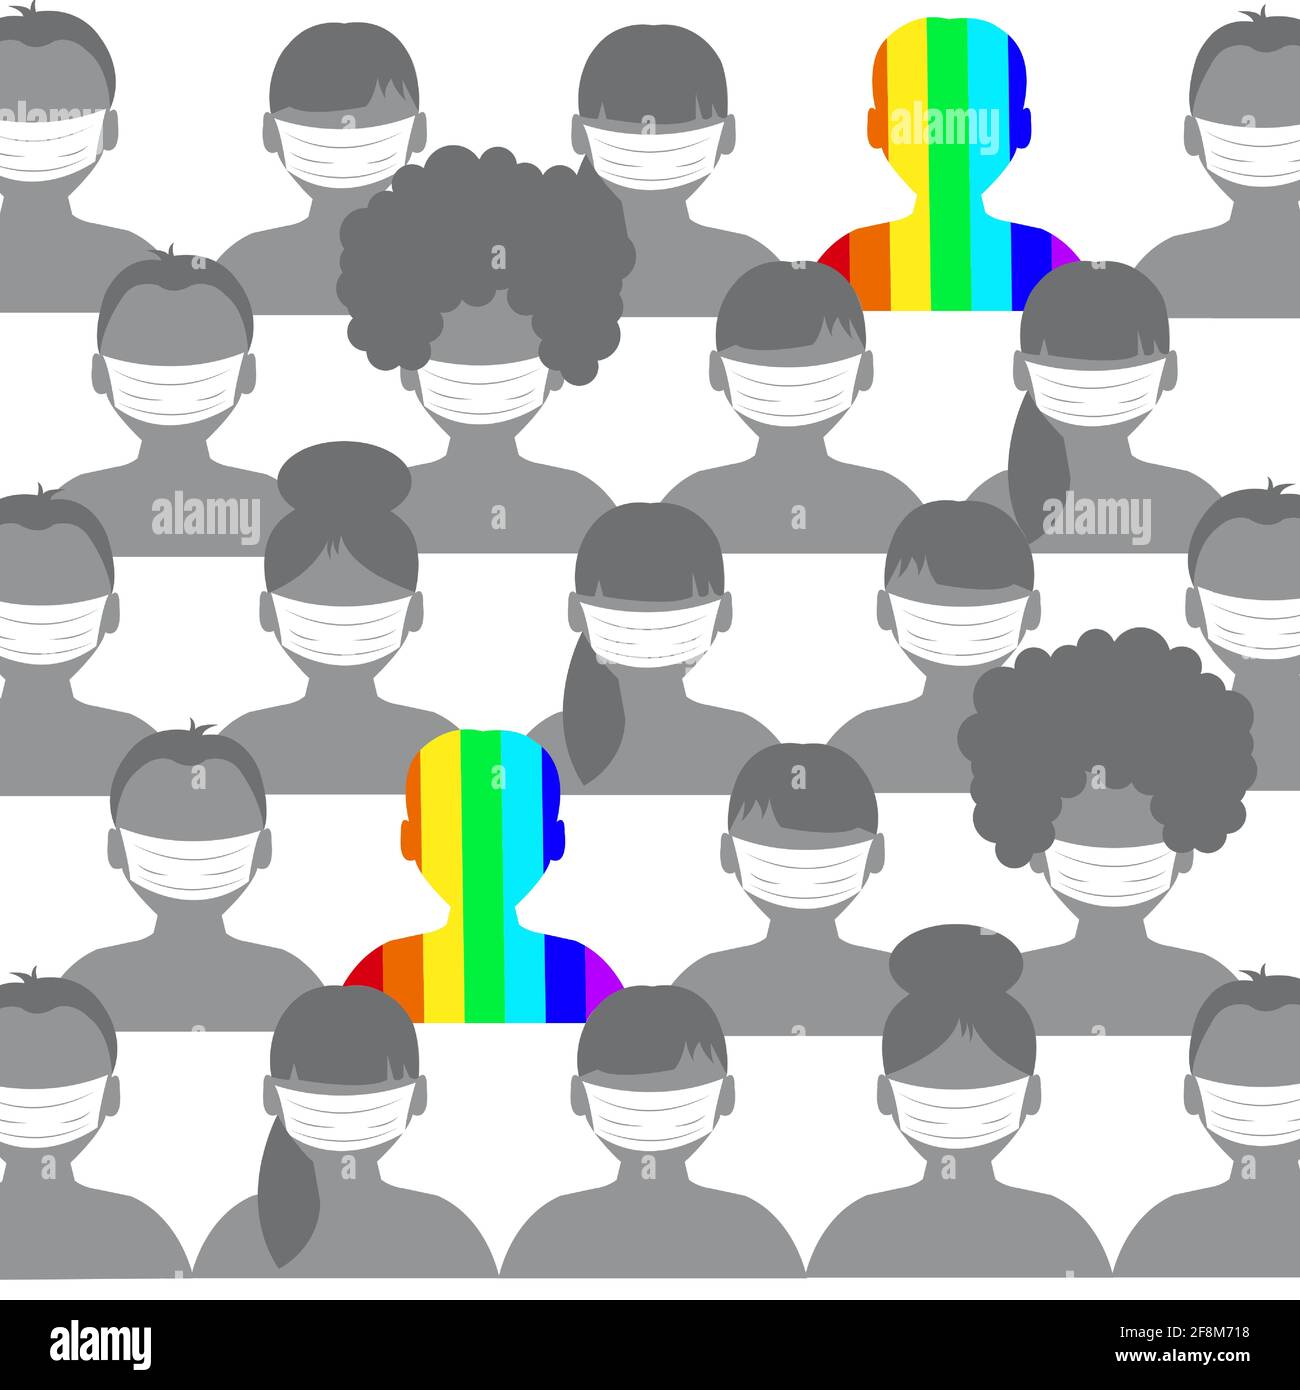 Rainbow man gray crowd in stylish style. Social diversity concept. People diversity. Vector isolated illustration. Confident person. Success symbol. Stock Vector